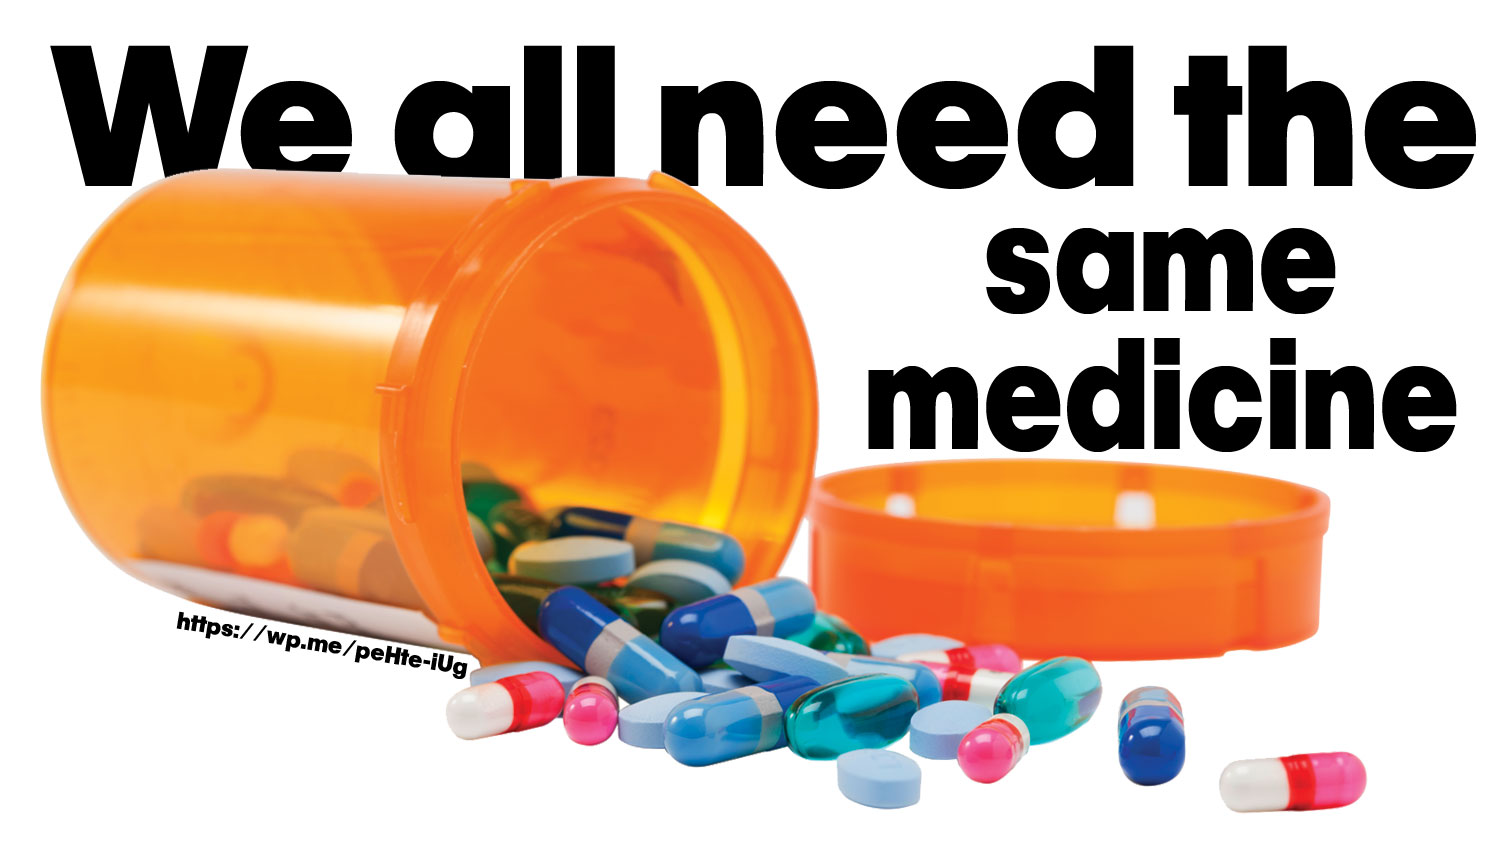 We all need the same medicine to cure sin. It is the same medicine for EVERYONE! We just need to apply it!